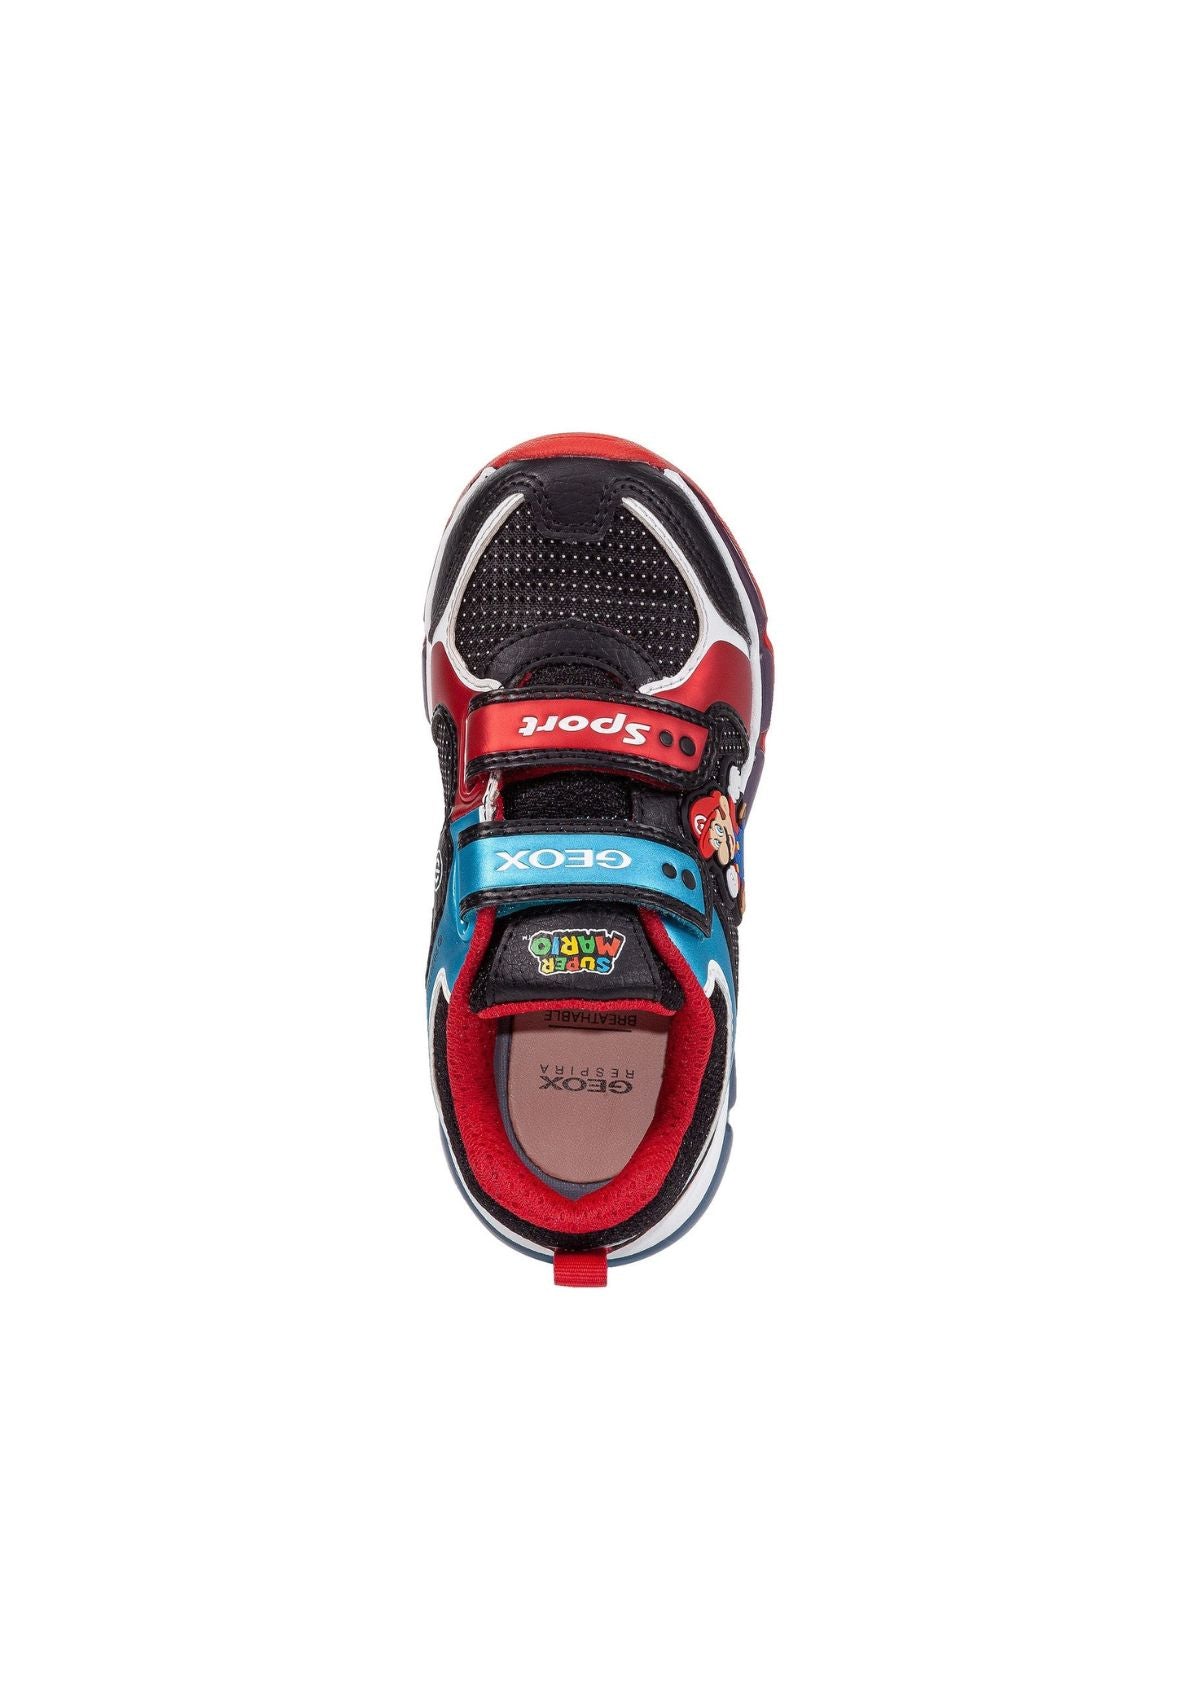 Geox Junior Boys ANDROID Black Sky UP